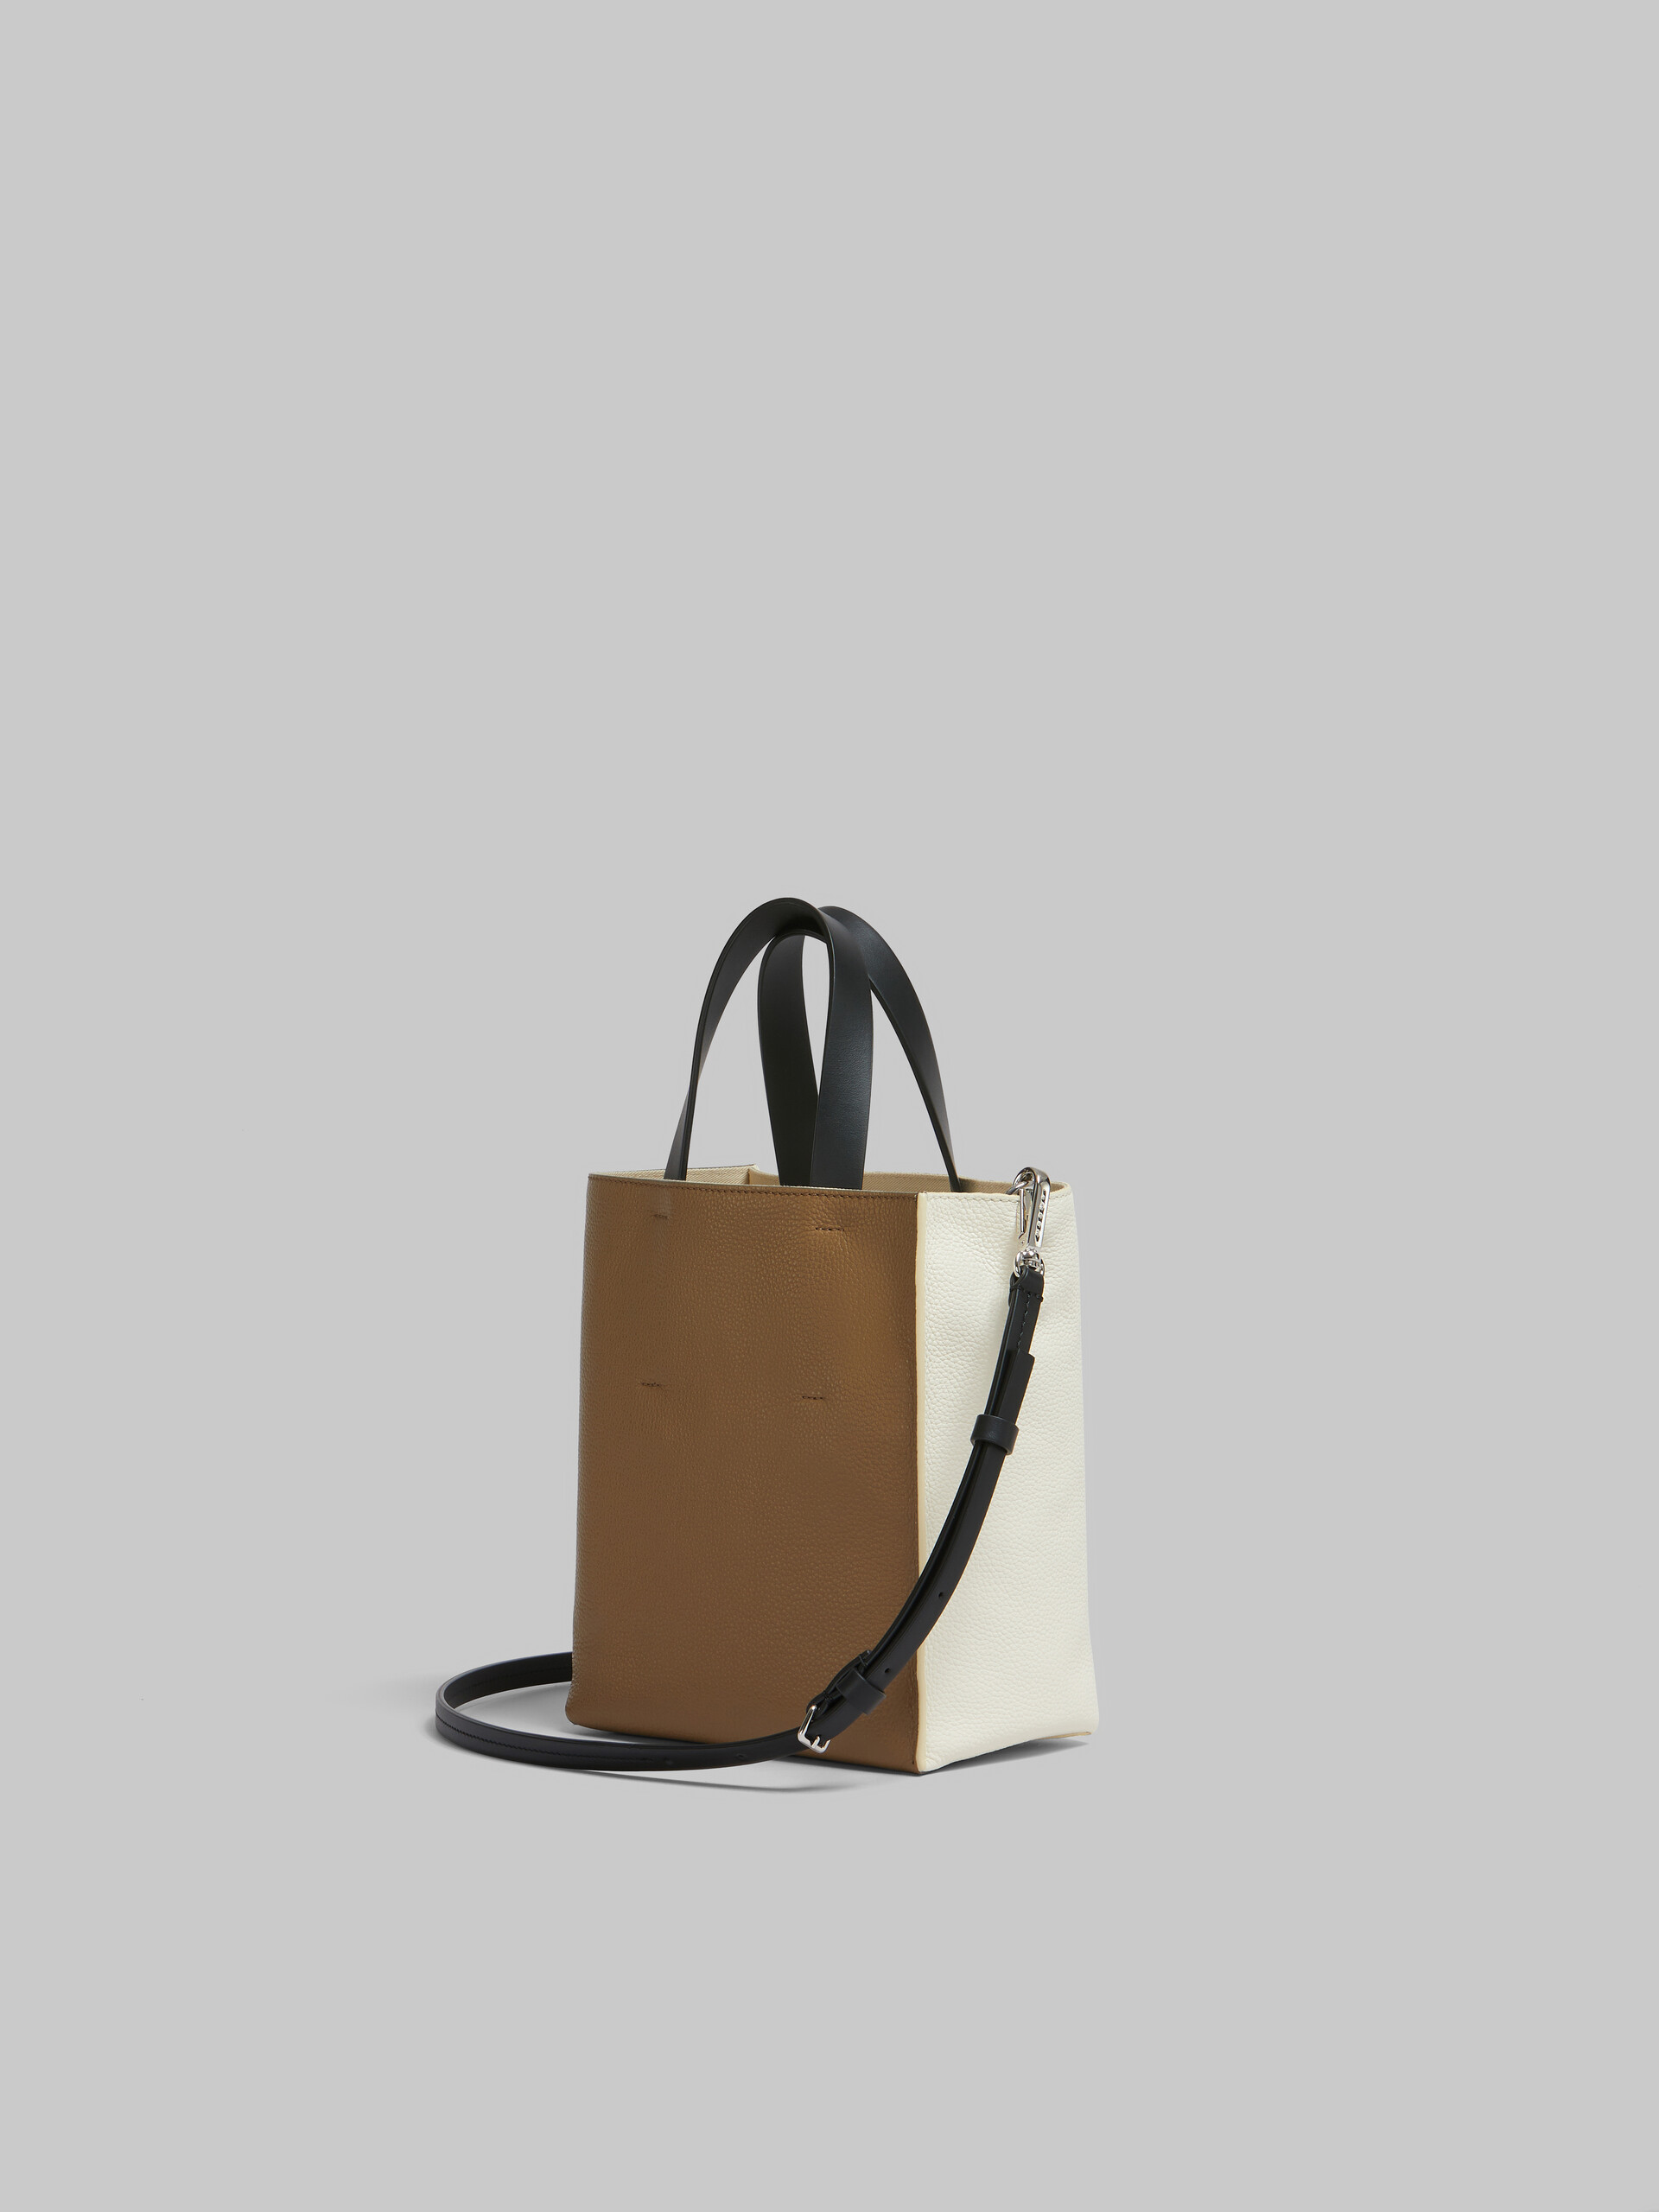 Museo Soft Mini Bag in ivory and brown leather with Marni mending - Shopping Bags - Image 3